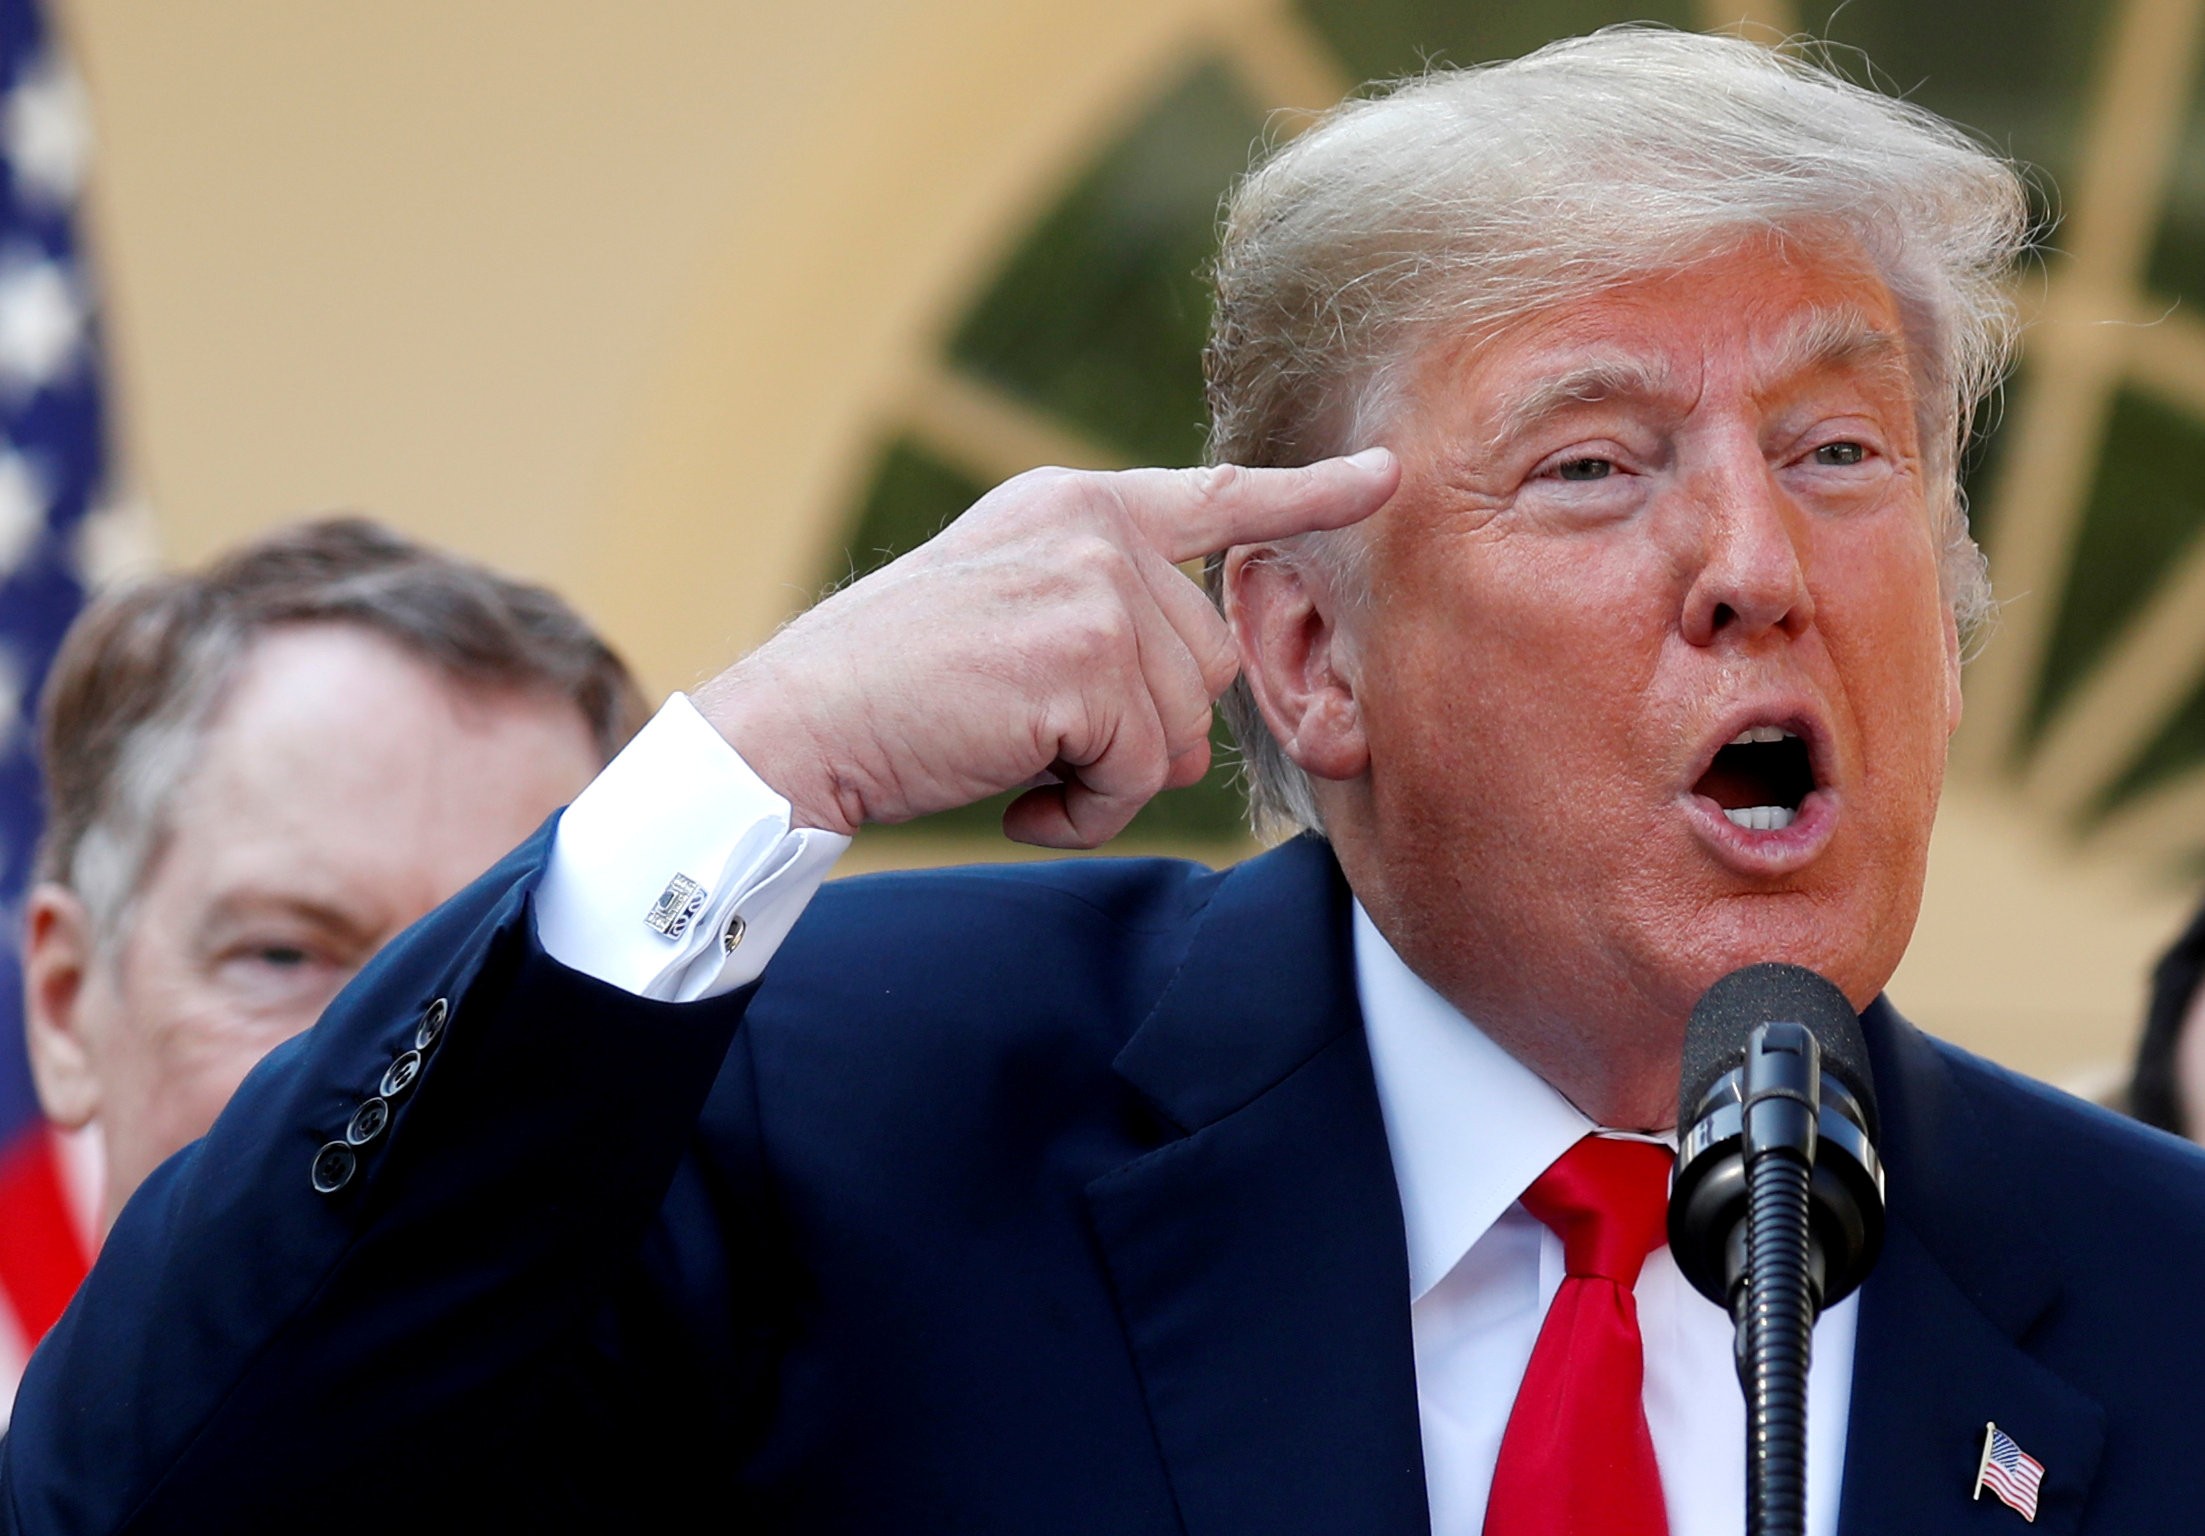 US President Donald Trump delivers remarks on the United States-Mexico-Canada Agreement as US Trade Representative Robert Lighthizer listens during a news conference at the White House in Washington on October 1. Photo: Reuters